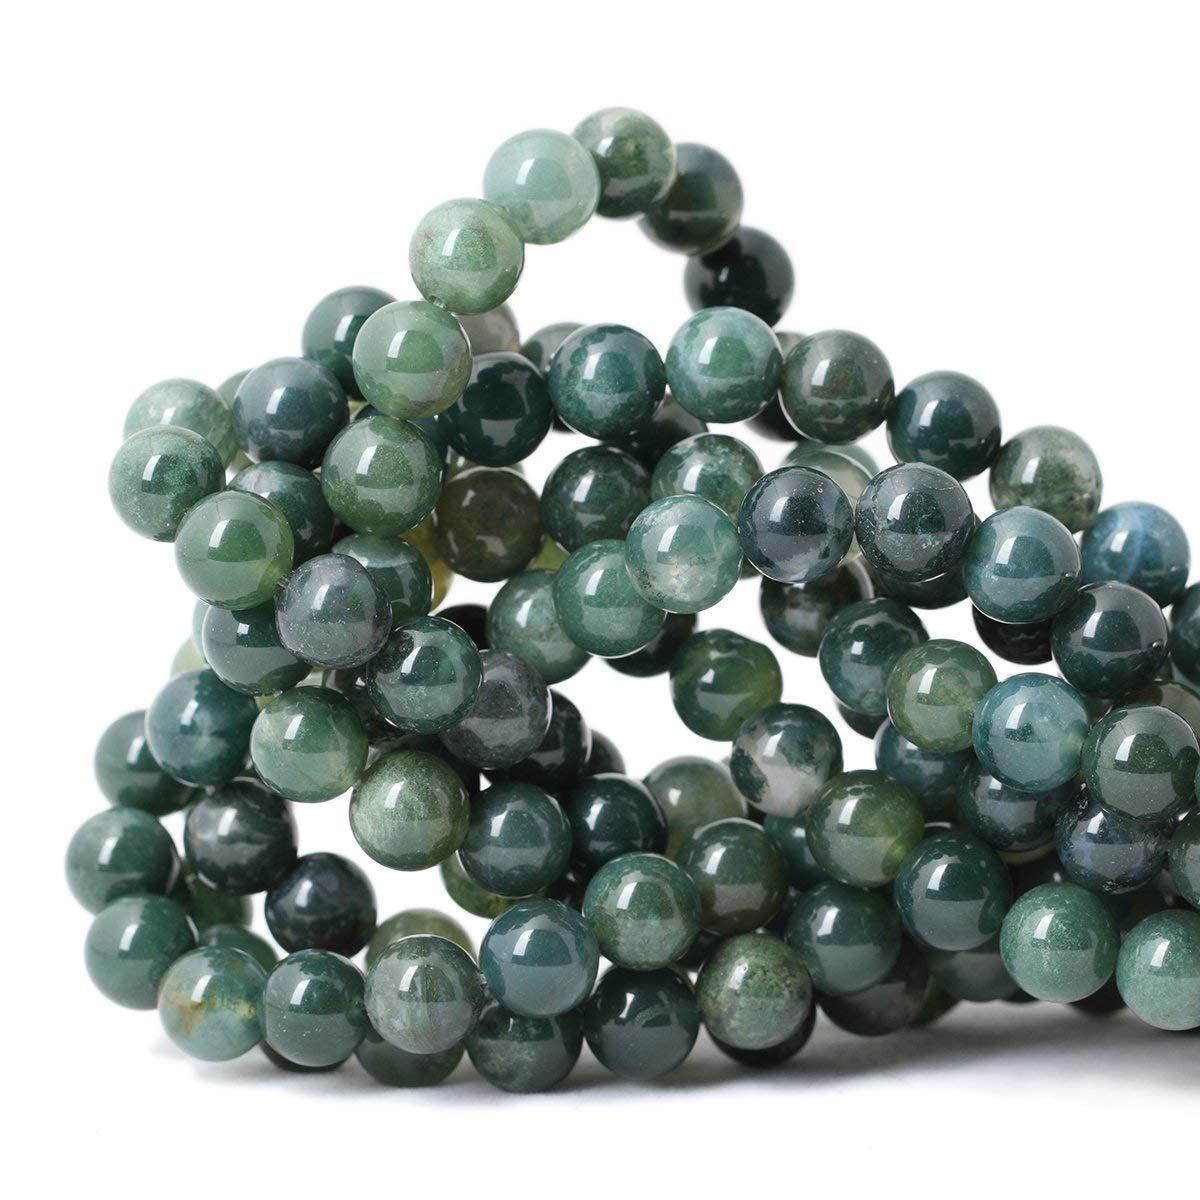 Water grass agate 12mm/ about 32 pieces/strand, we